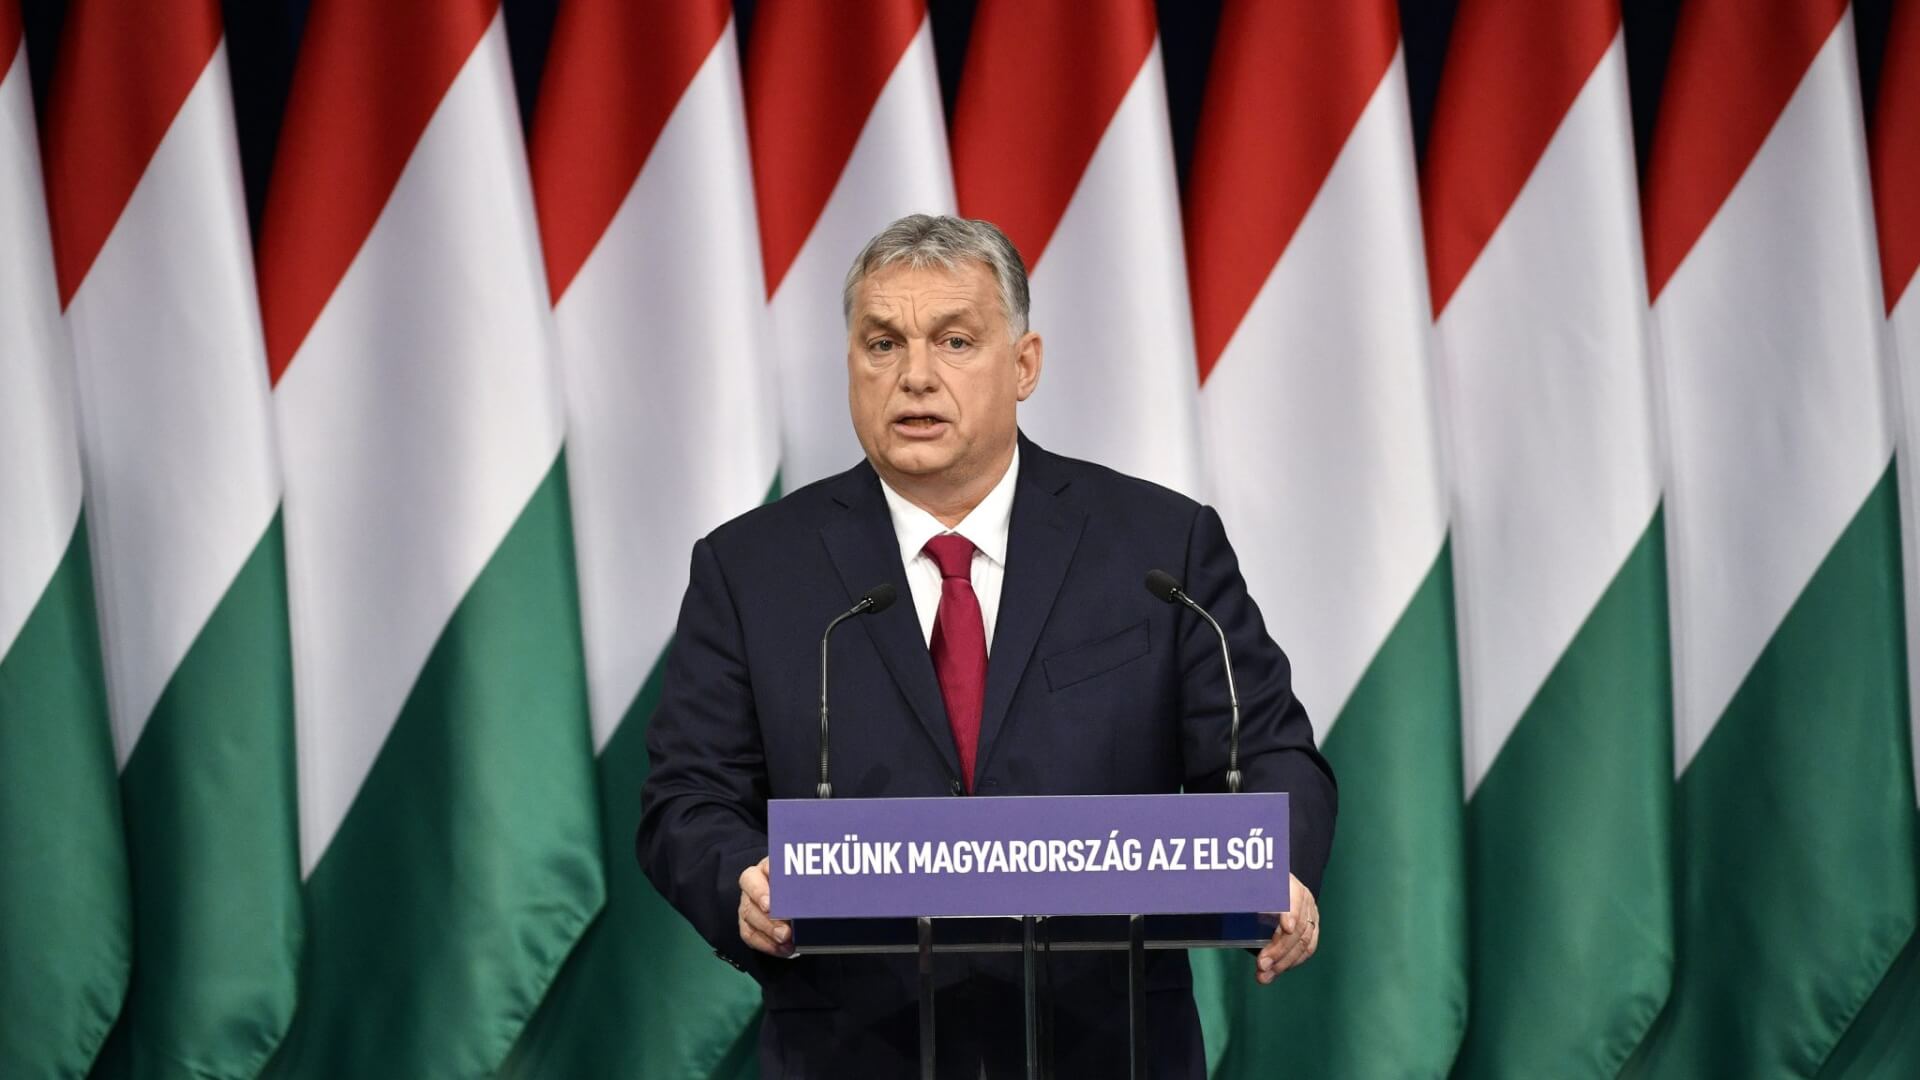 Hungary PM Orbán Faces Backlash Over Call To Curb Powers of EU Parliament